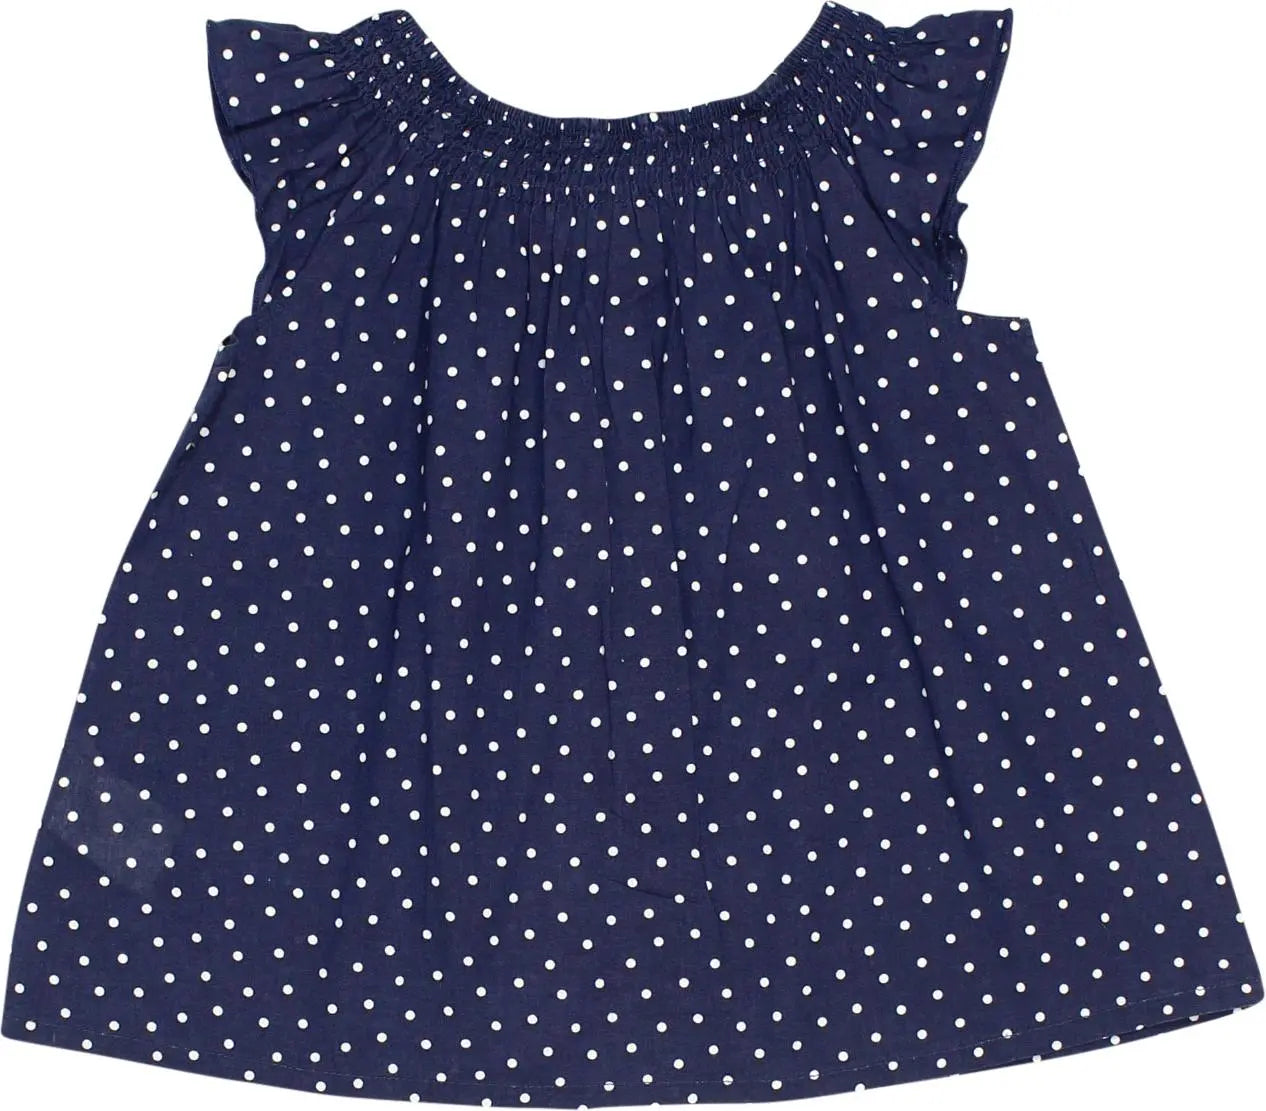 H&M - Blue Polkadot Dress- ThriftTale.com - Vintage and second handclothing